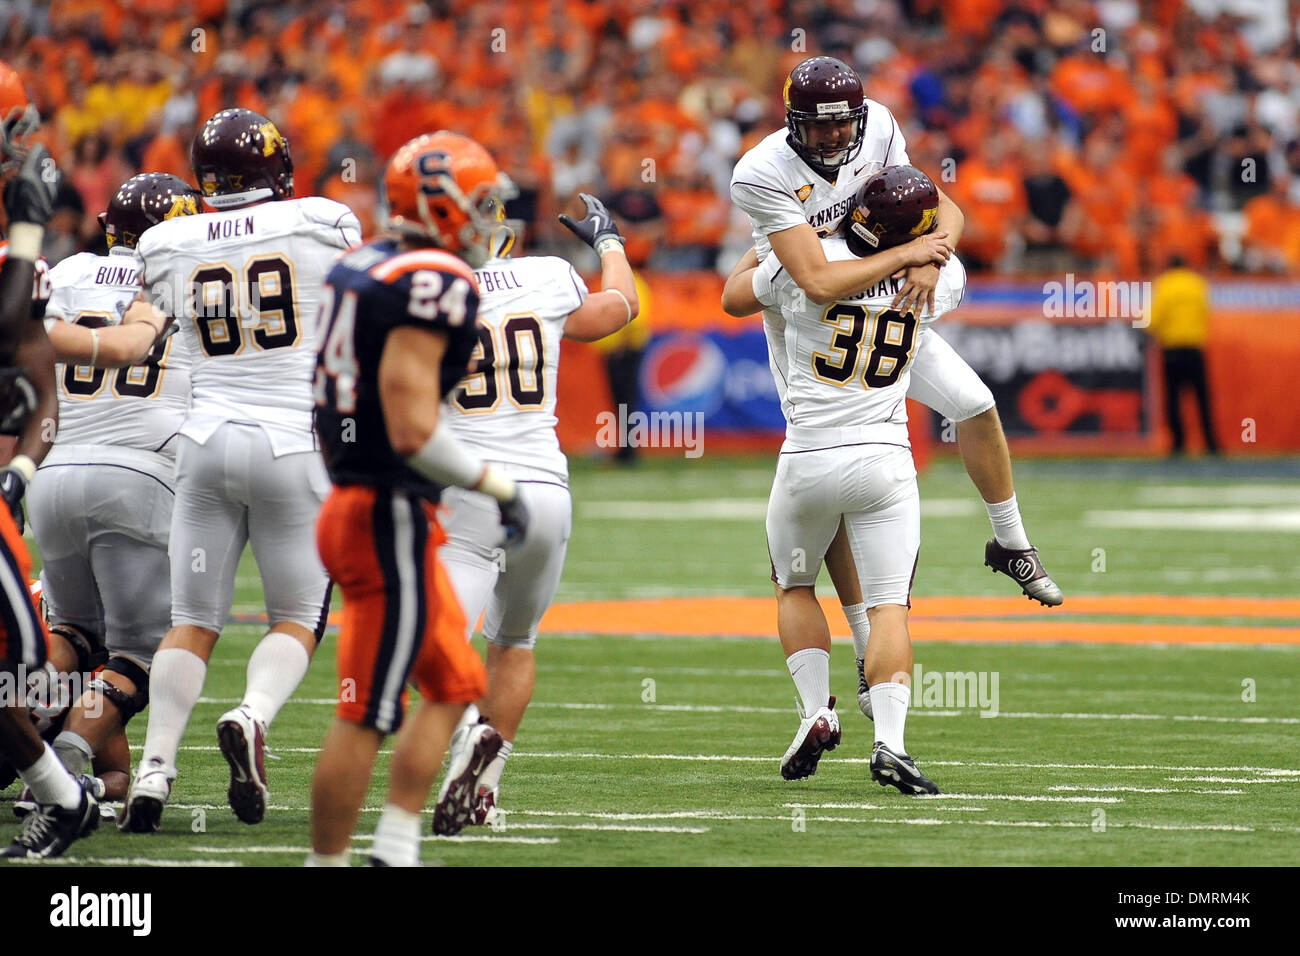 Minnesota Golden Gopher game hero Eric Ellestad gets a boost from teammate  Blake Haudan ,38, after kicking the game winning field goal in overtime to  give Minnesota the 23-20 win over Syracuse